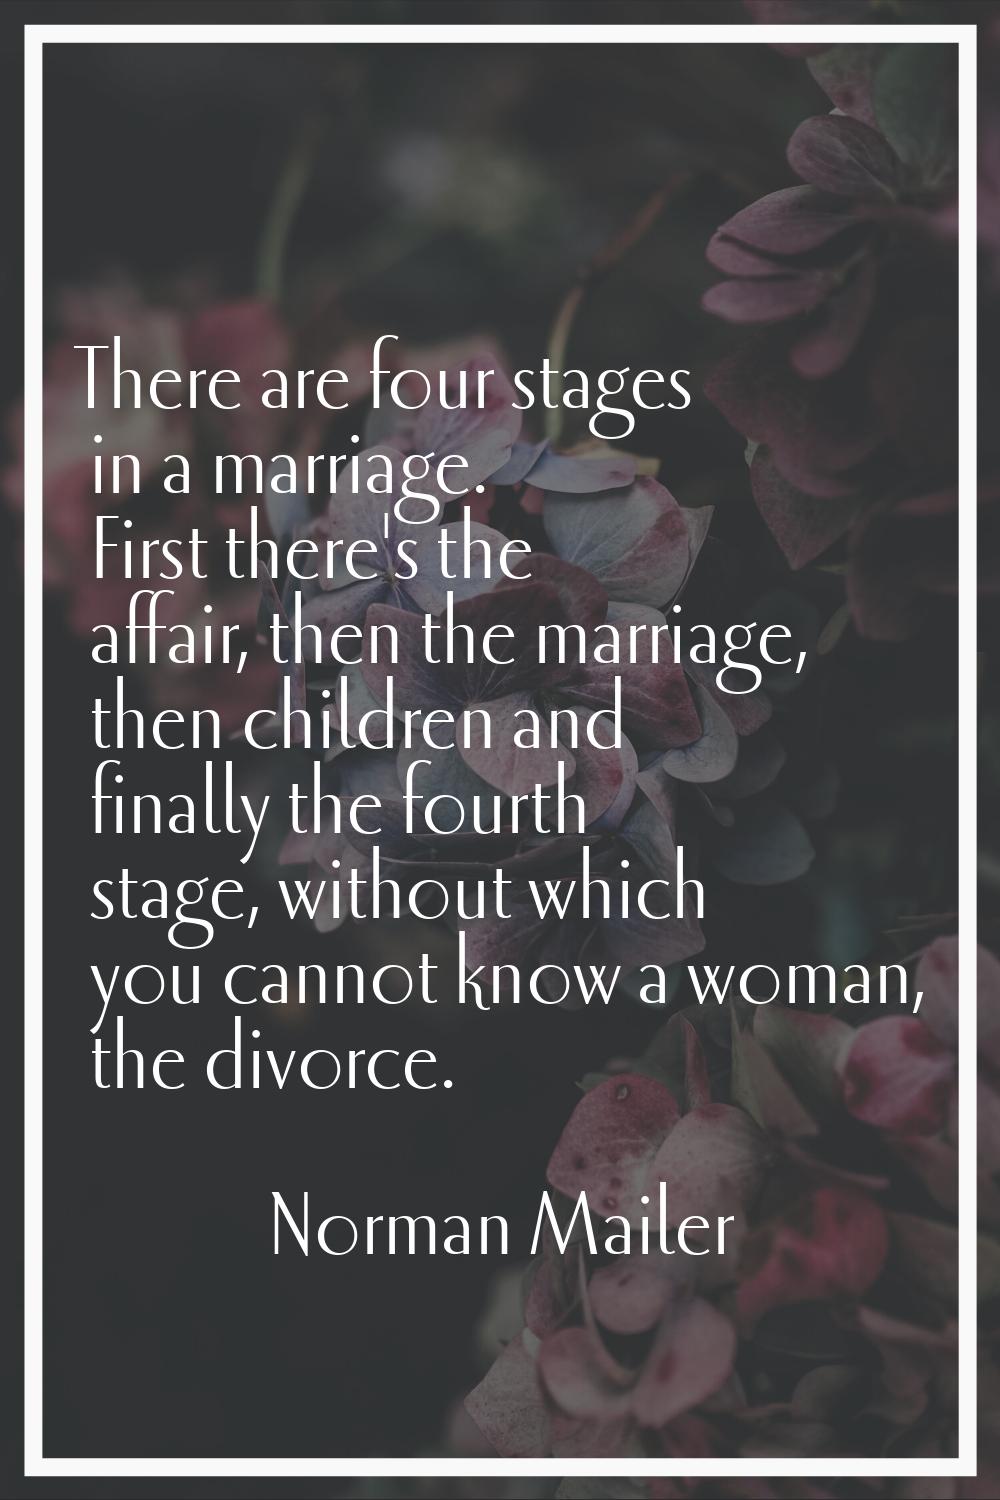 There are four stages in a marriage. First there's the affair, then the marriage, then children and